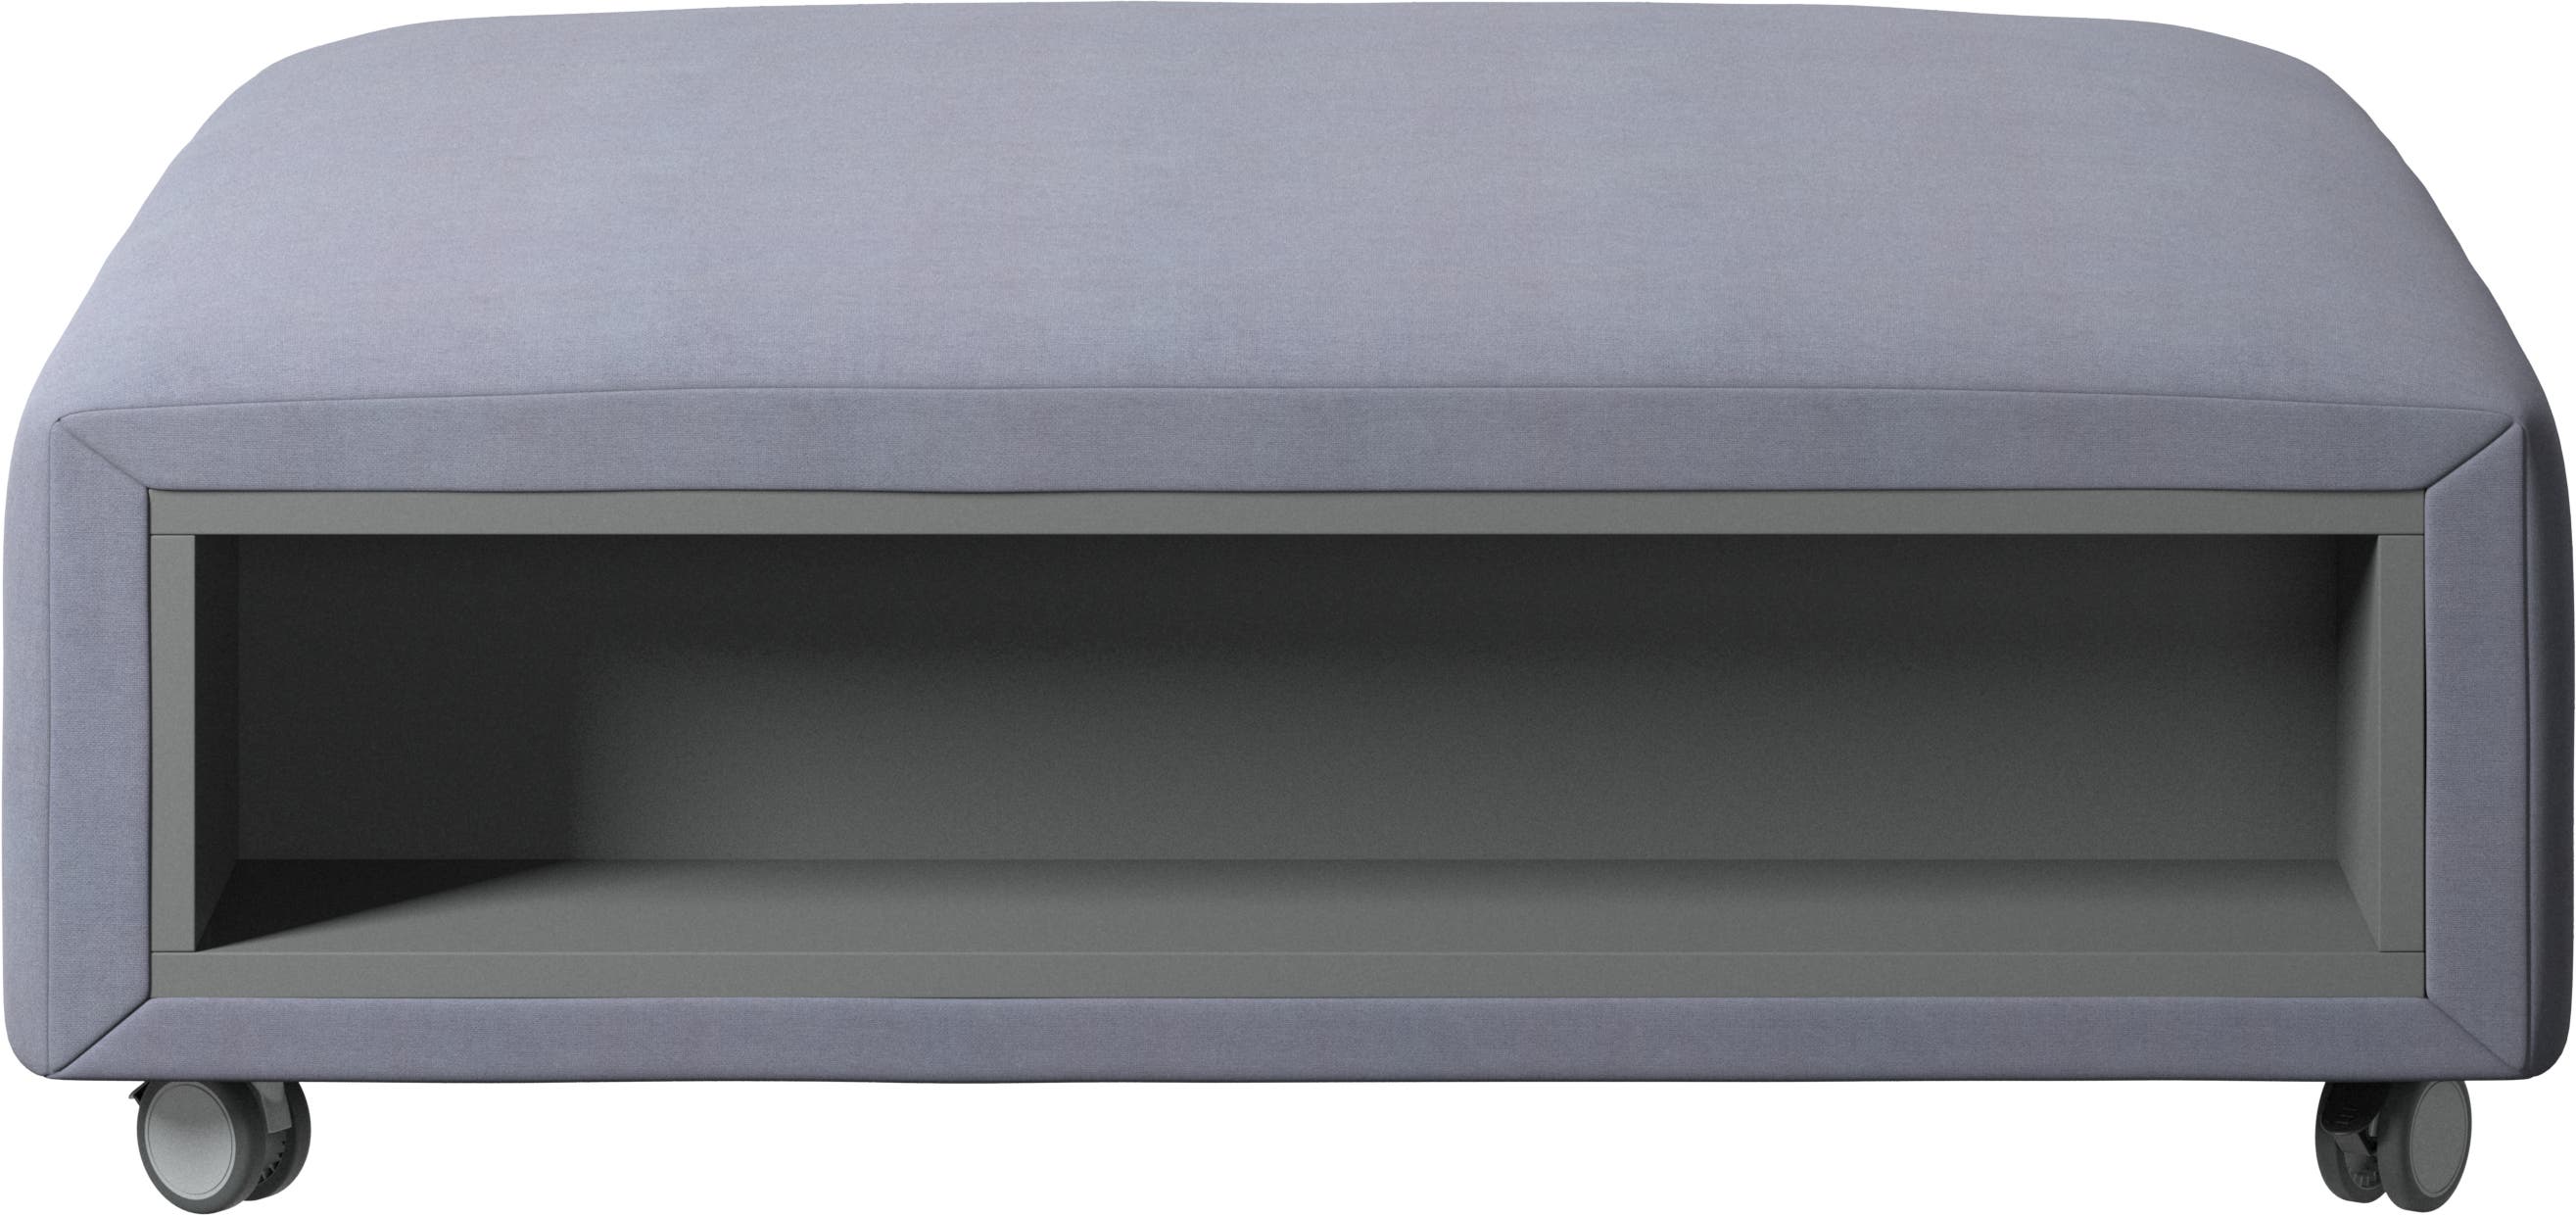 Hampton footstool on wheels with storage left and right sides